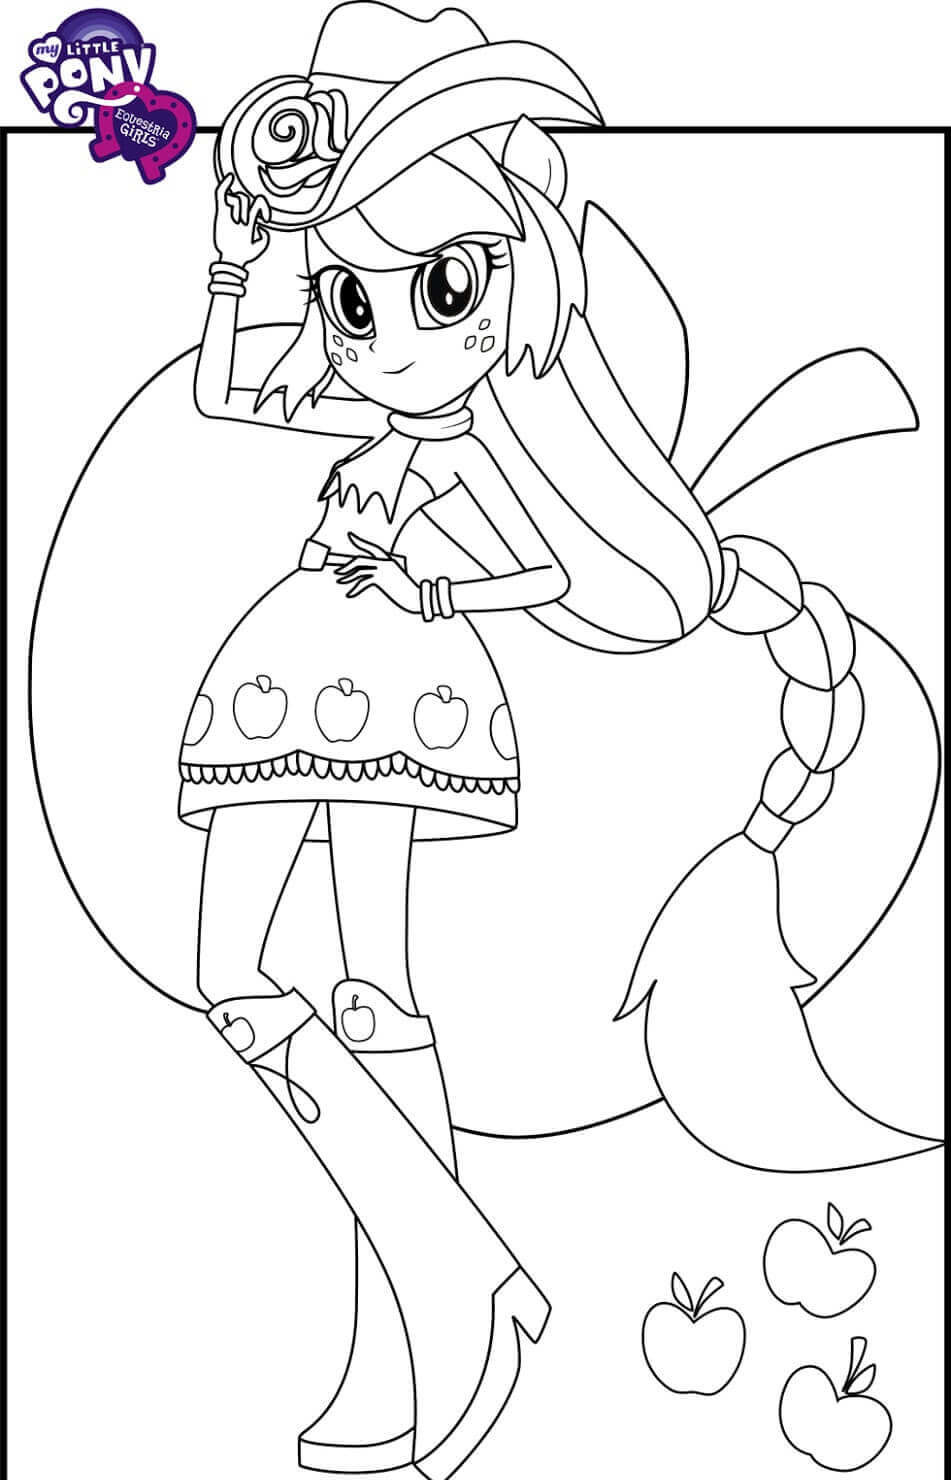 Applejack From My Little Pony Equestria Girls Coloring Page